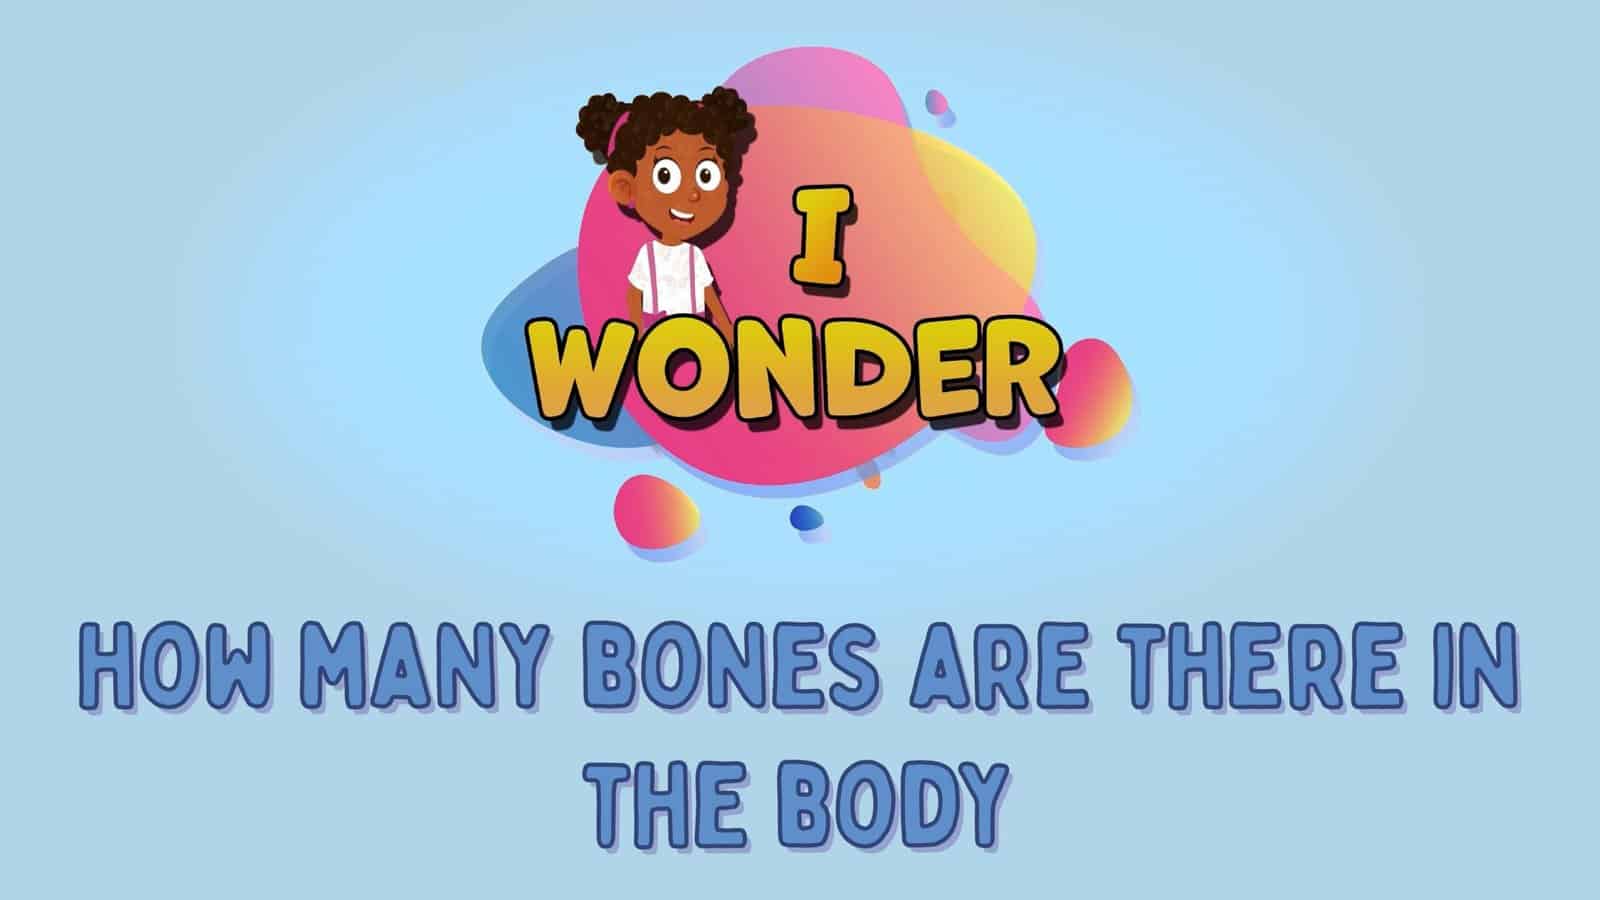 How Many Bones Are There In The Body?